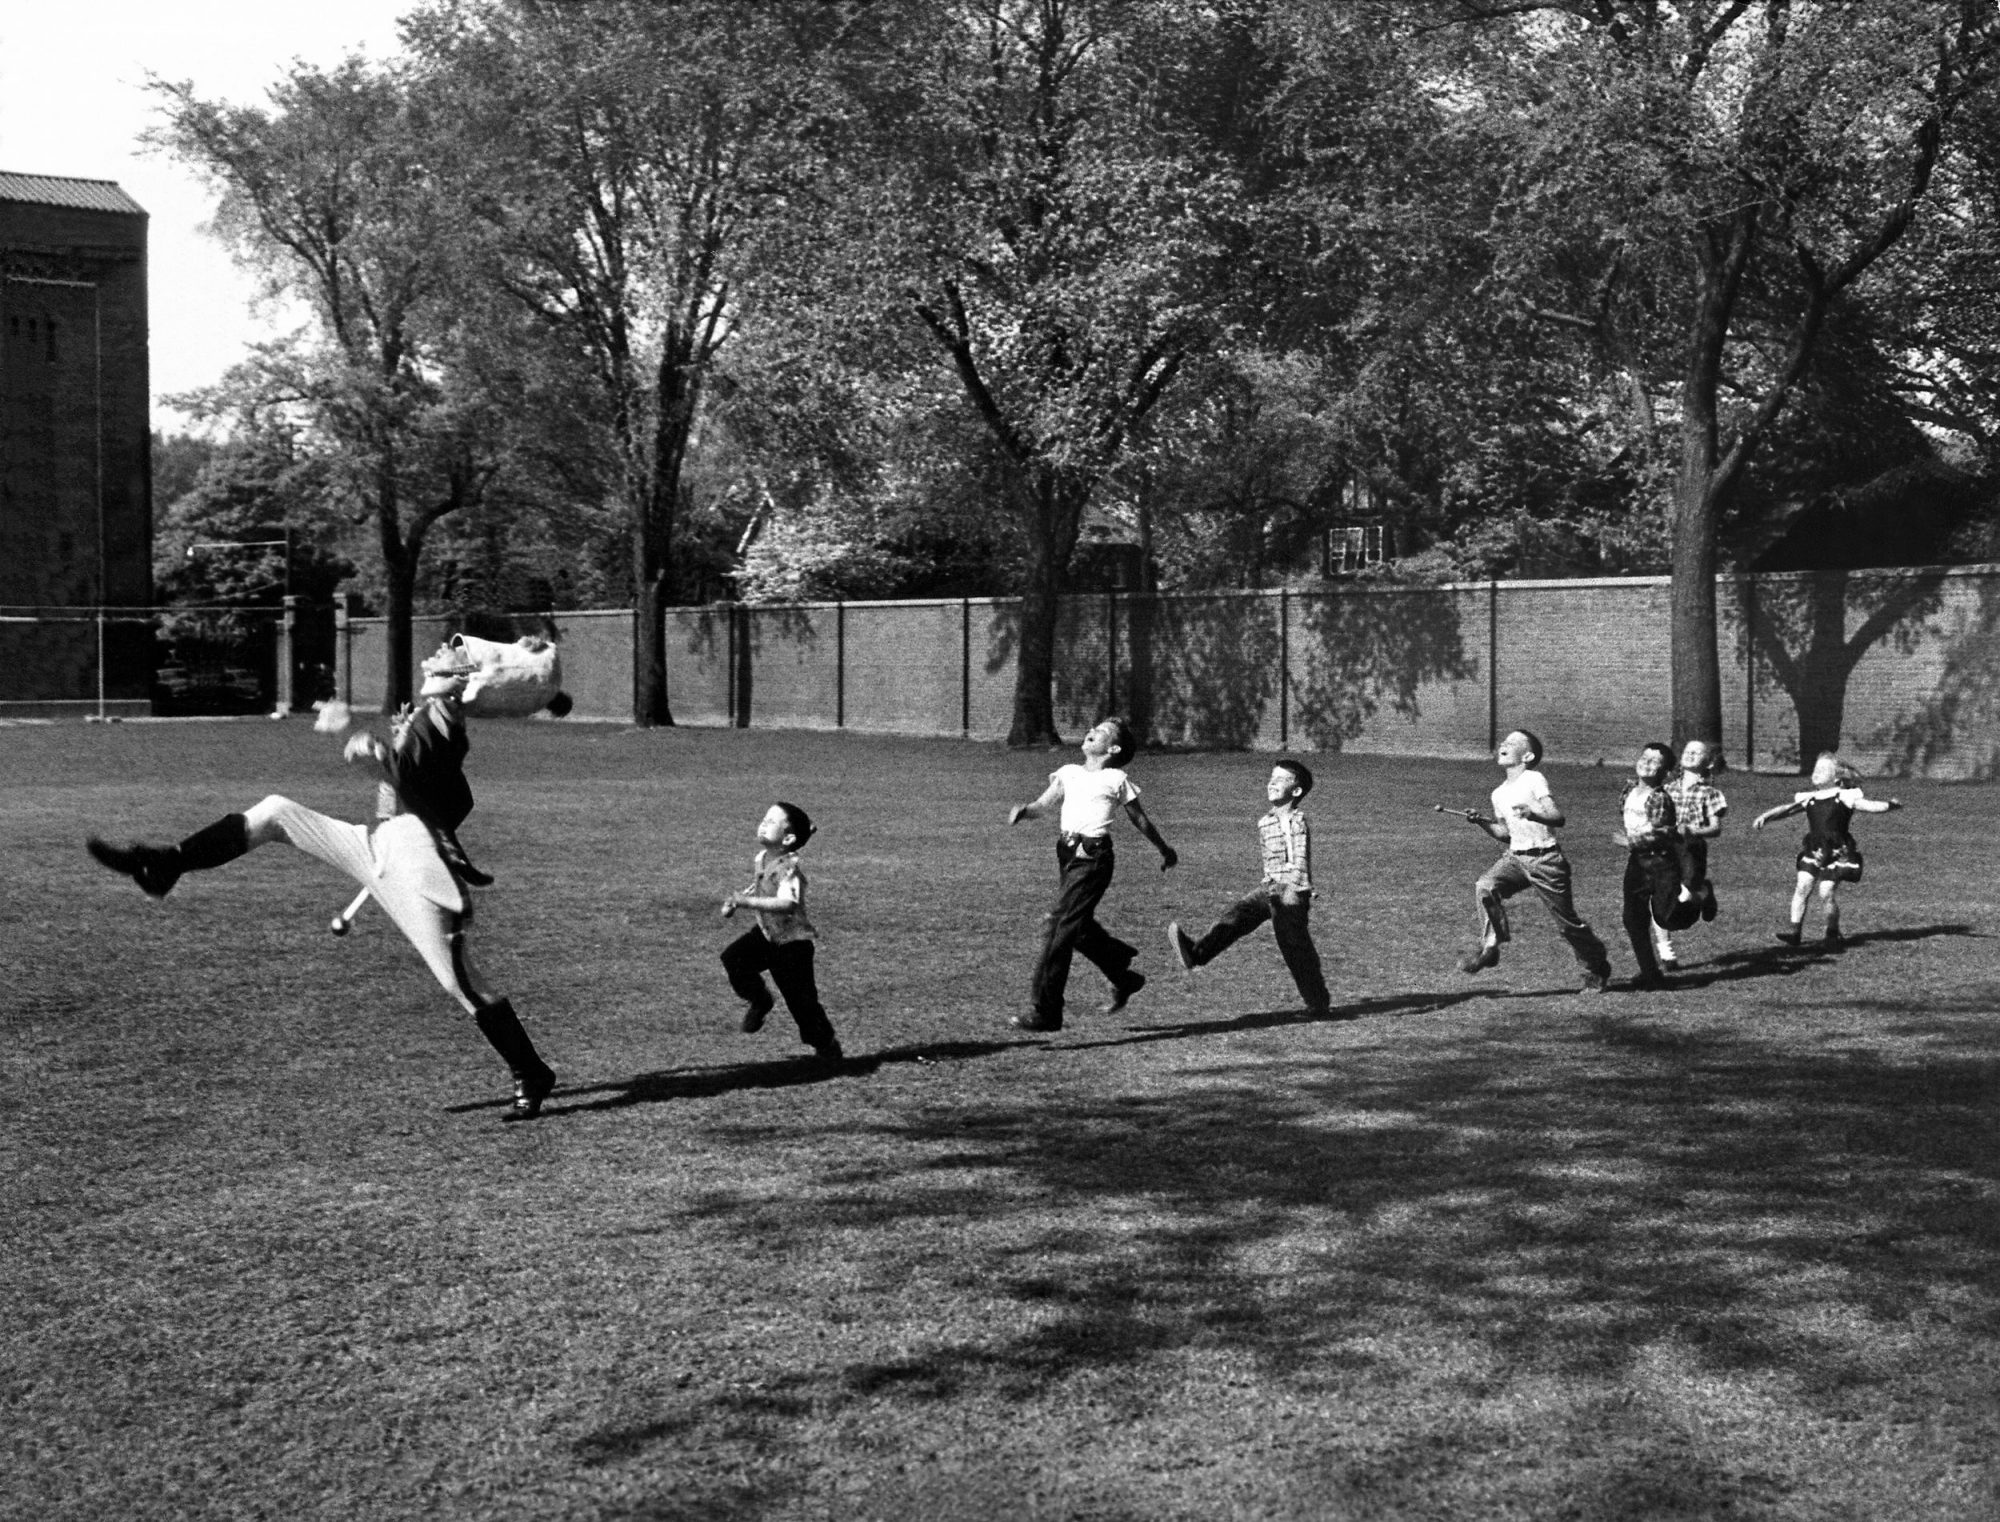 Fotó: Alfred Eisenstaedt: Michigan Egyetem, USA, 1951 © Time & Life Pictures/Getty Images 